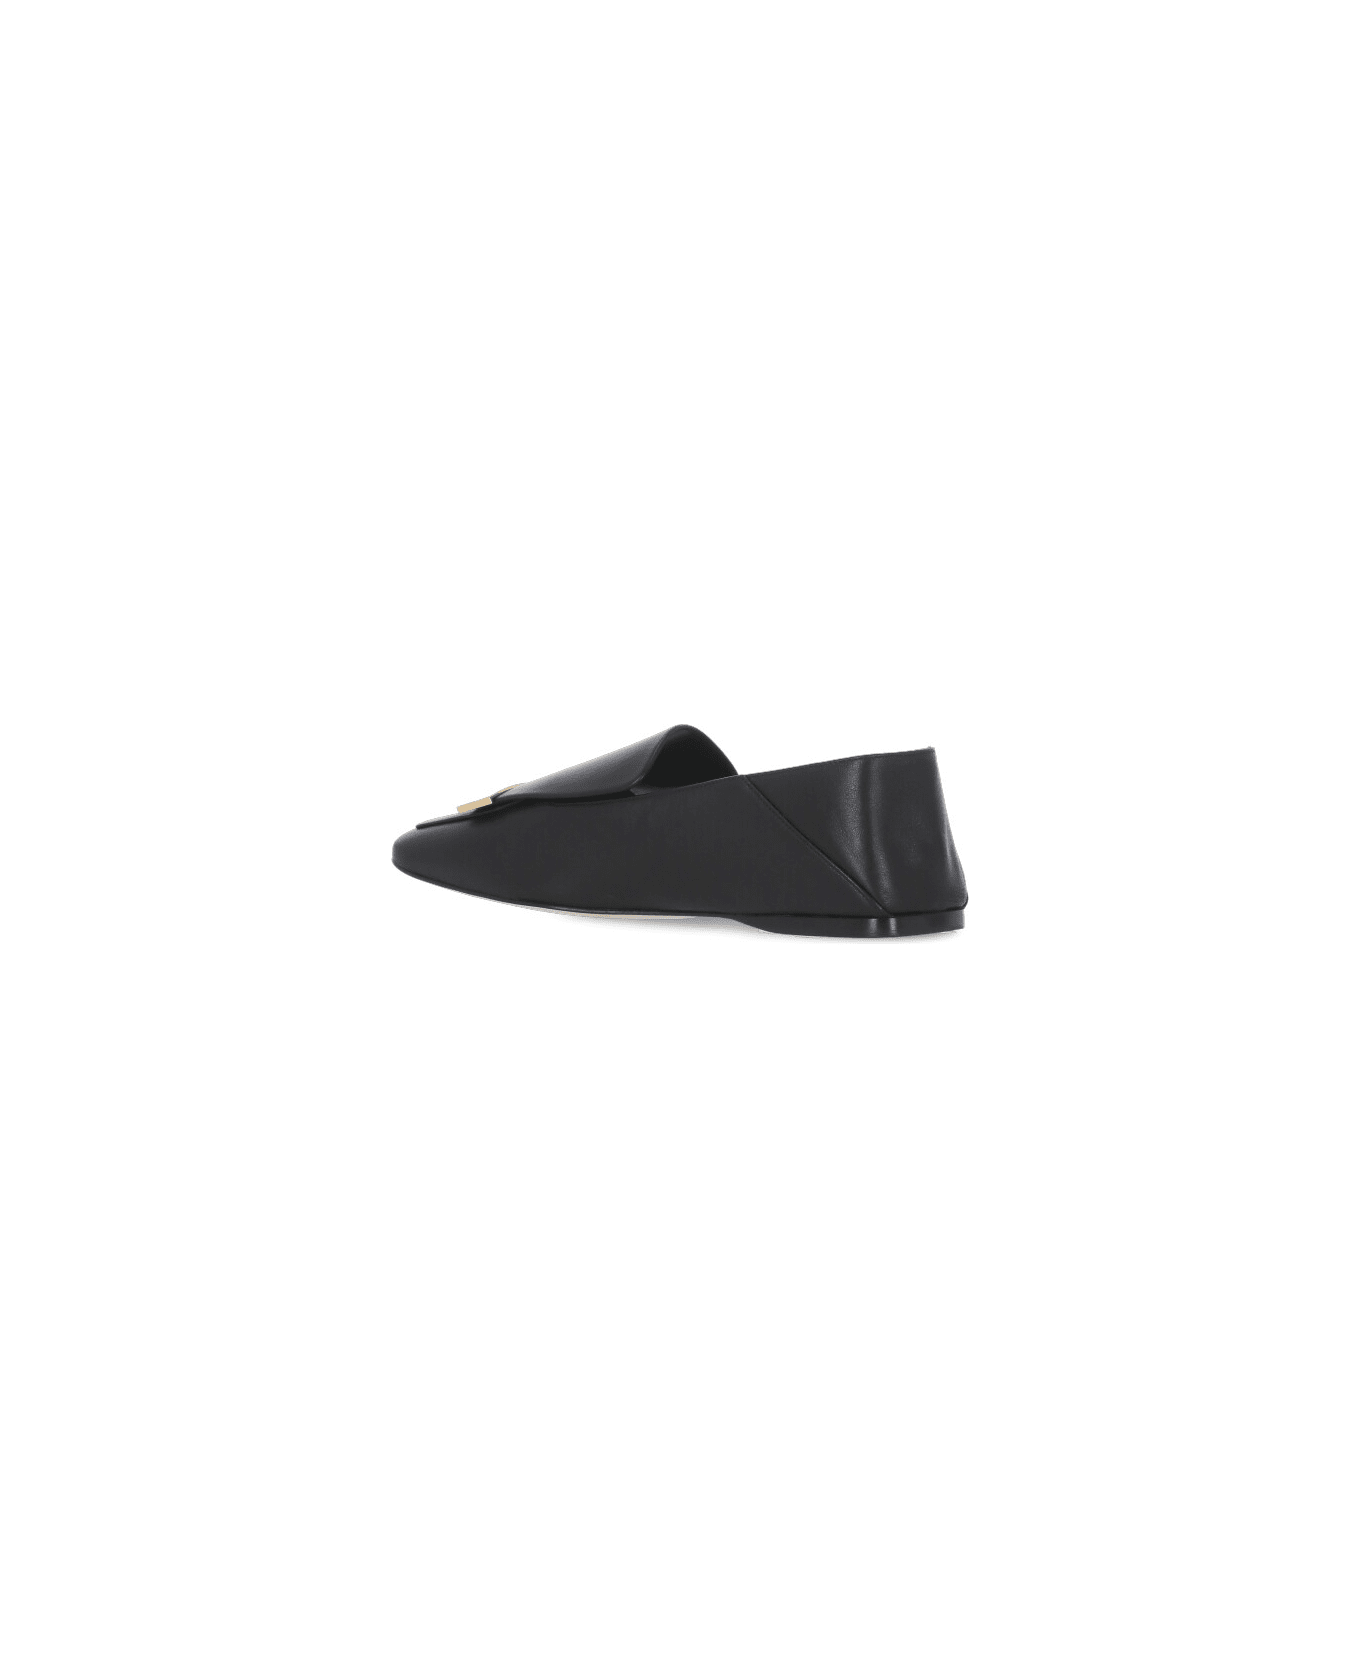 Sergio Rossi Leather Loafers - Black フラットシューズ